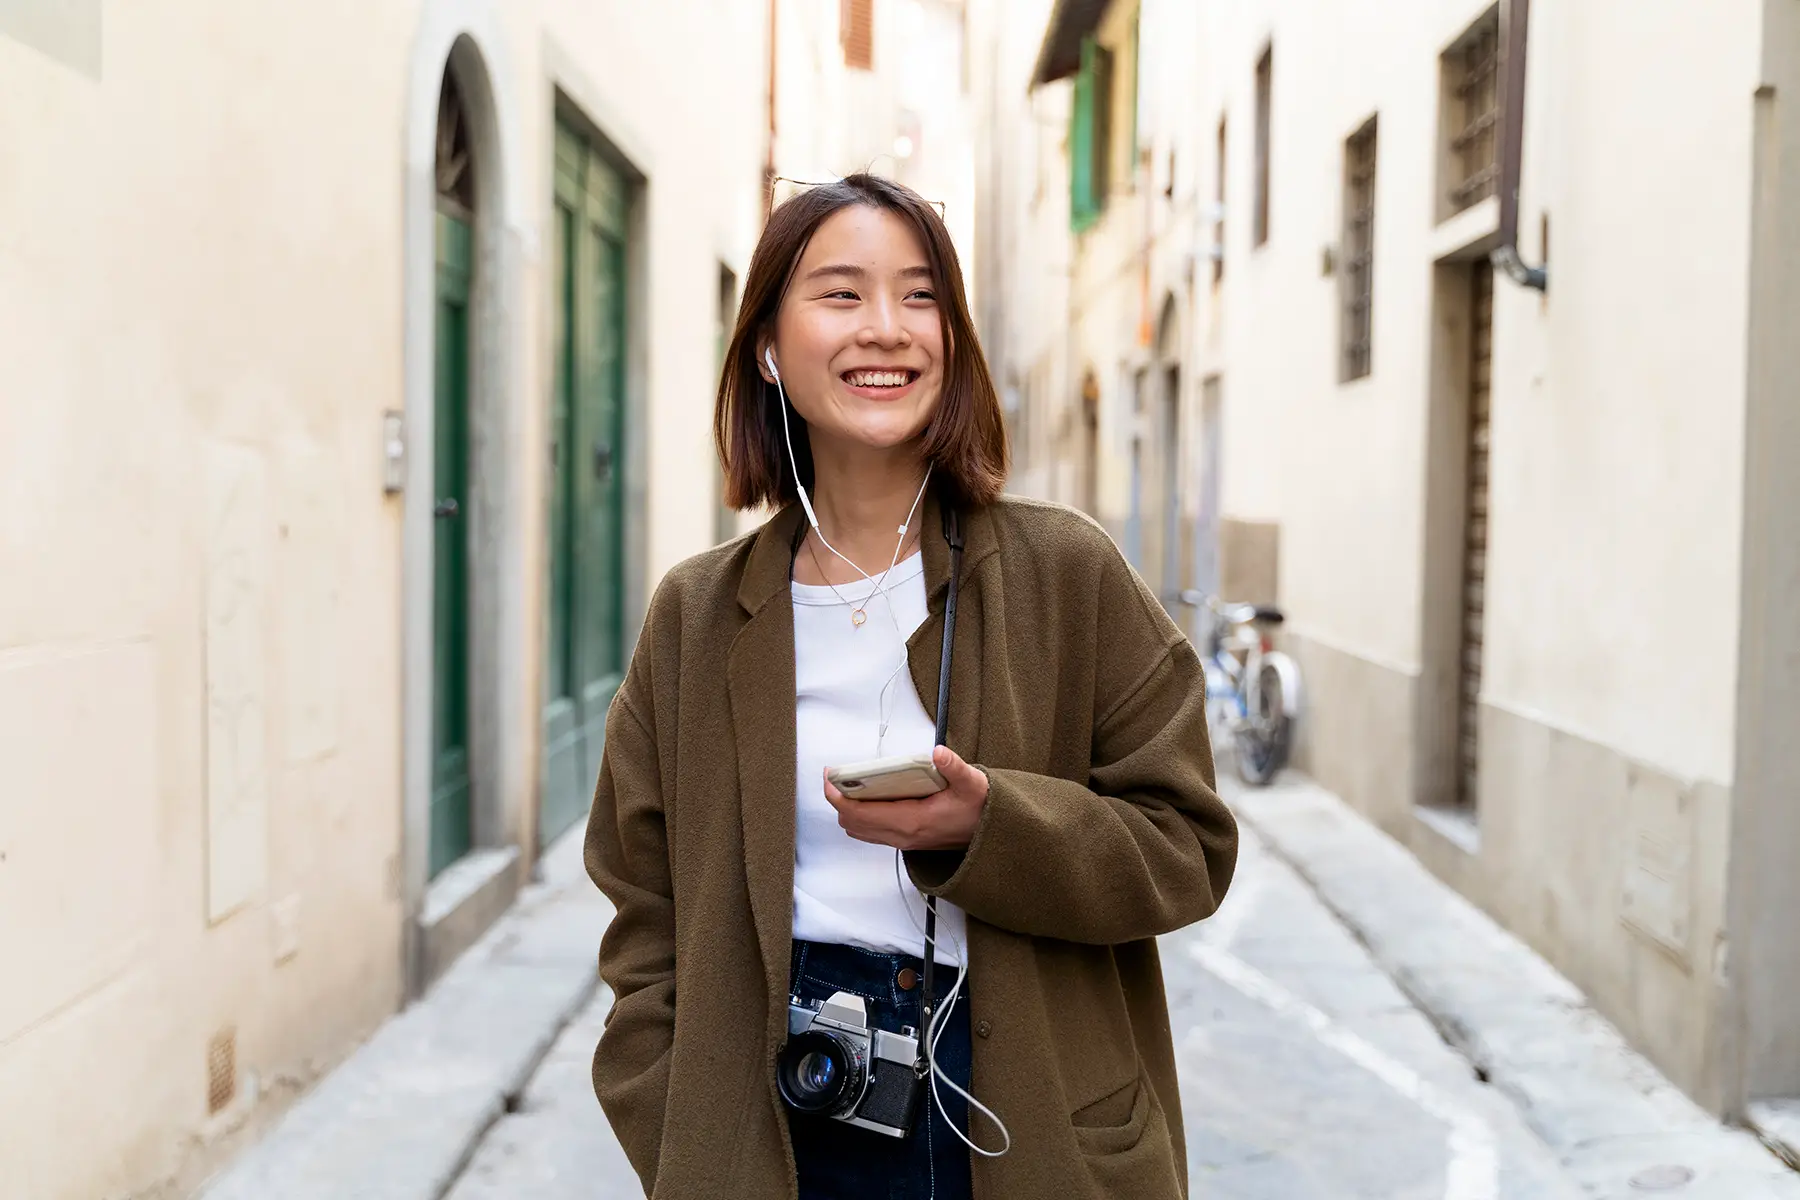 A happy woman walking down an Italian street holding a phone. She is wearing headphones that are connected to the phone.